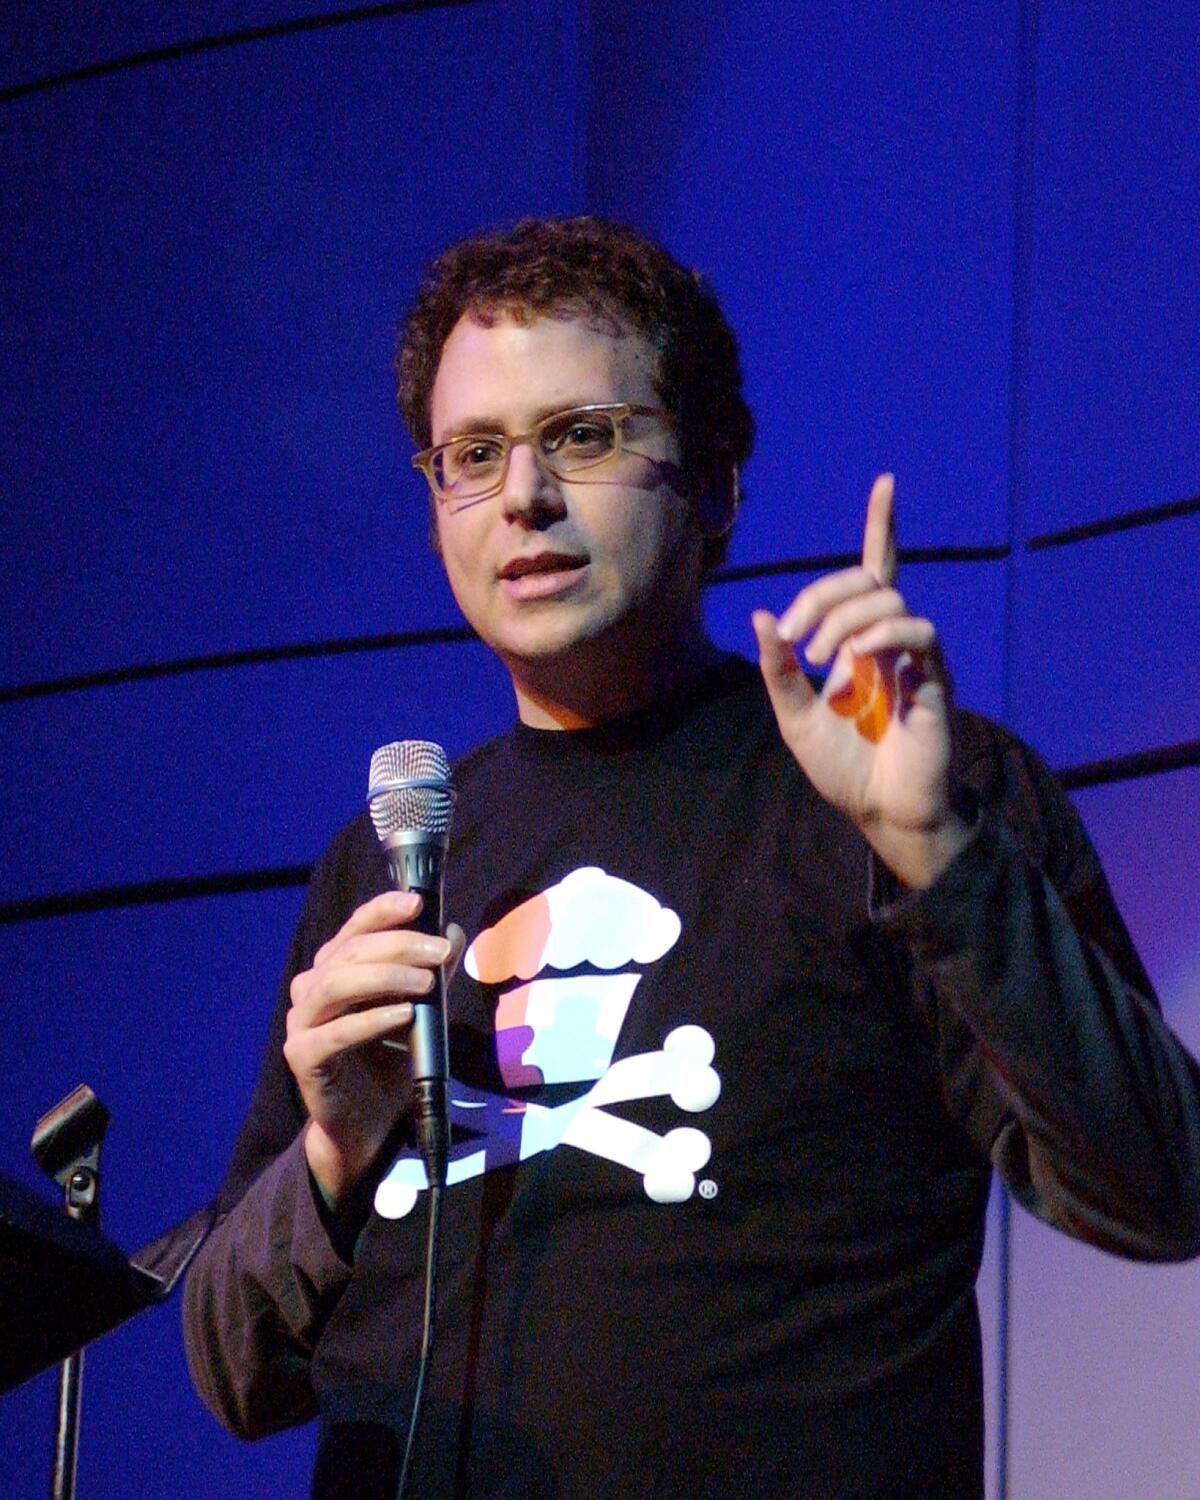 Stephen Glass, whose application to the California bar was turned down by the California Supreme Court, performs at the Skirball Cultural Center in 2007.